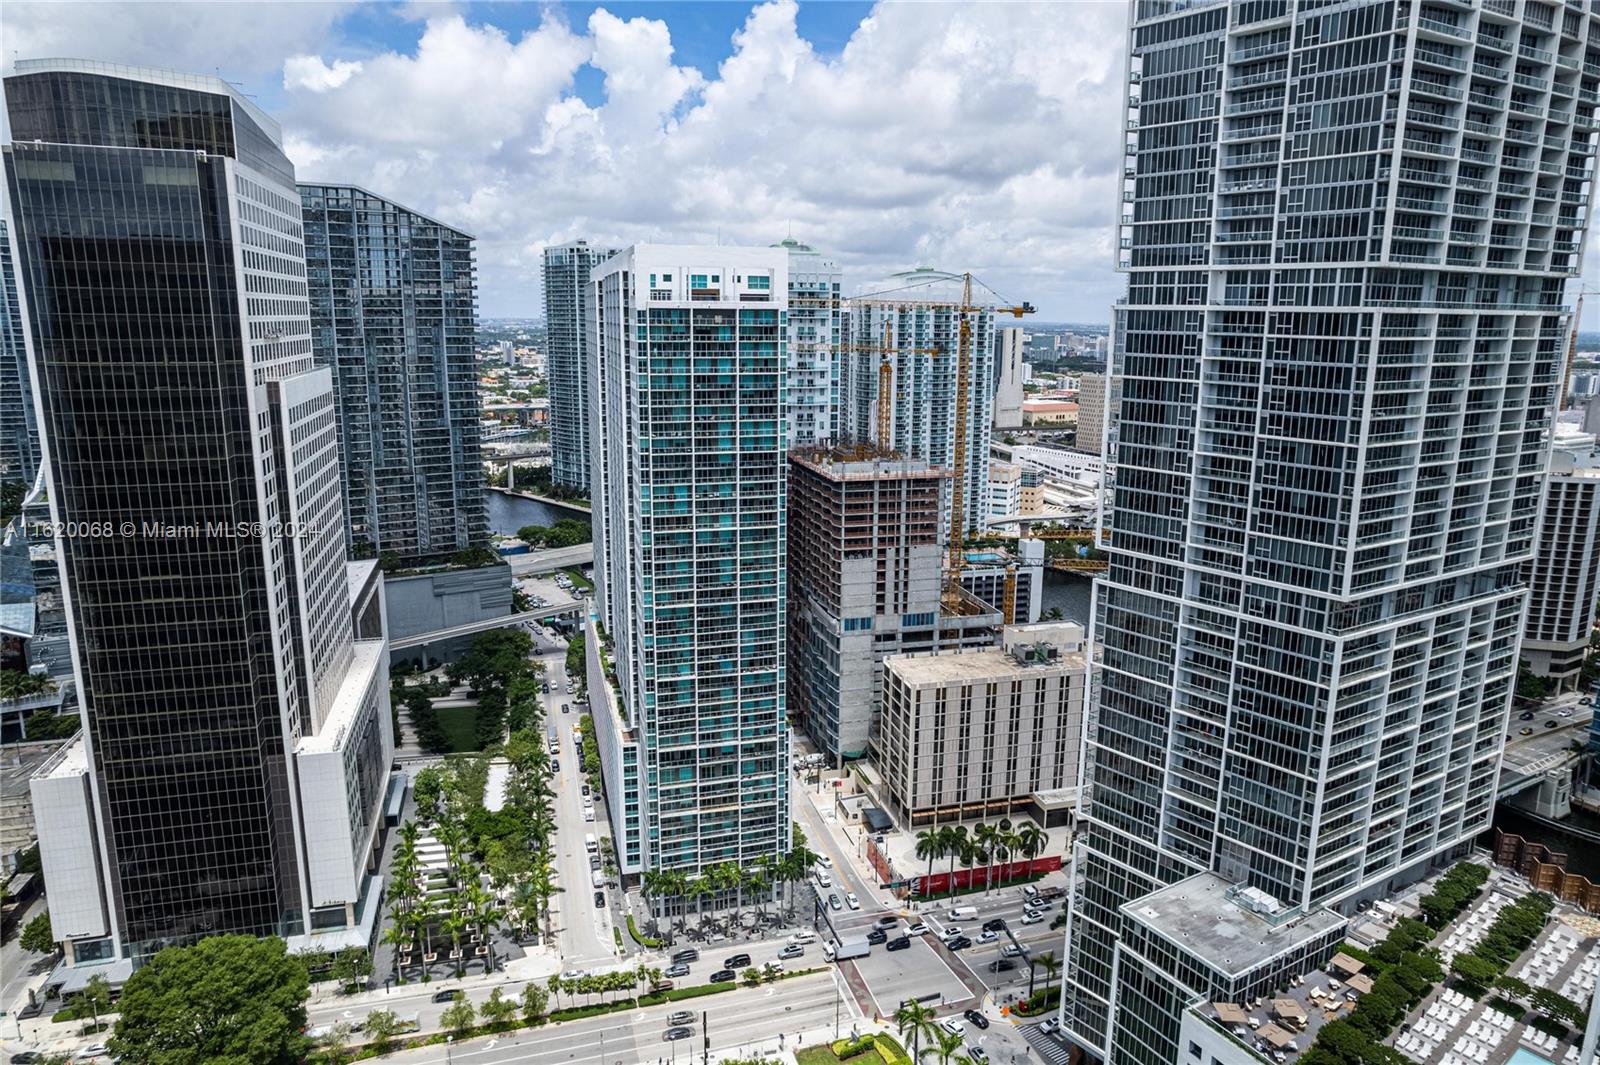 500 Brickell one bedroom / one bath with wide city views. 738 Sq Ft with carpeted floors thorough out, functional kitchen featuring "L" shape dinning area. Open balcony with access from living area and master suite. Tons of light!! Building offers roof top pool and bar and a second larger pool to enjoy. The gym is fully equipped and the party rooms offer kitchen facilities. Full service with concierge and valet. Location is non-parallel, close to all the action!